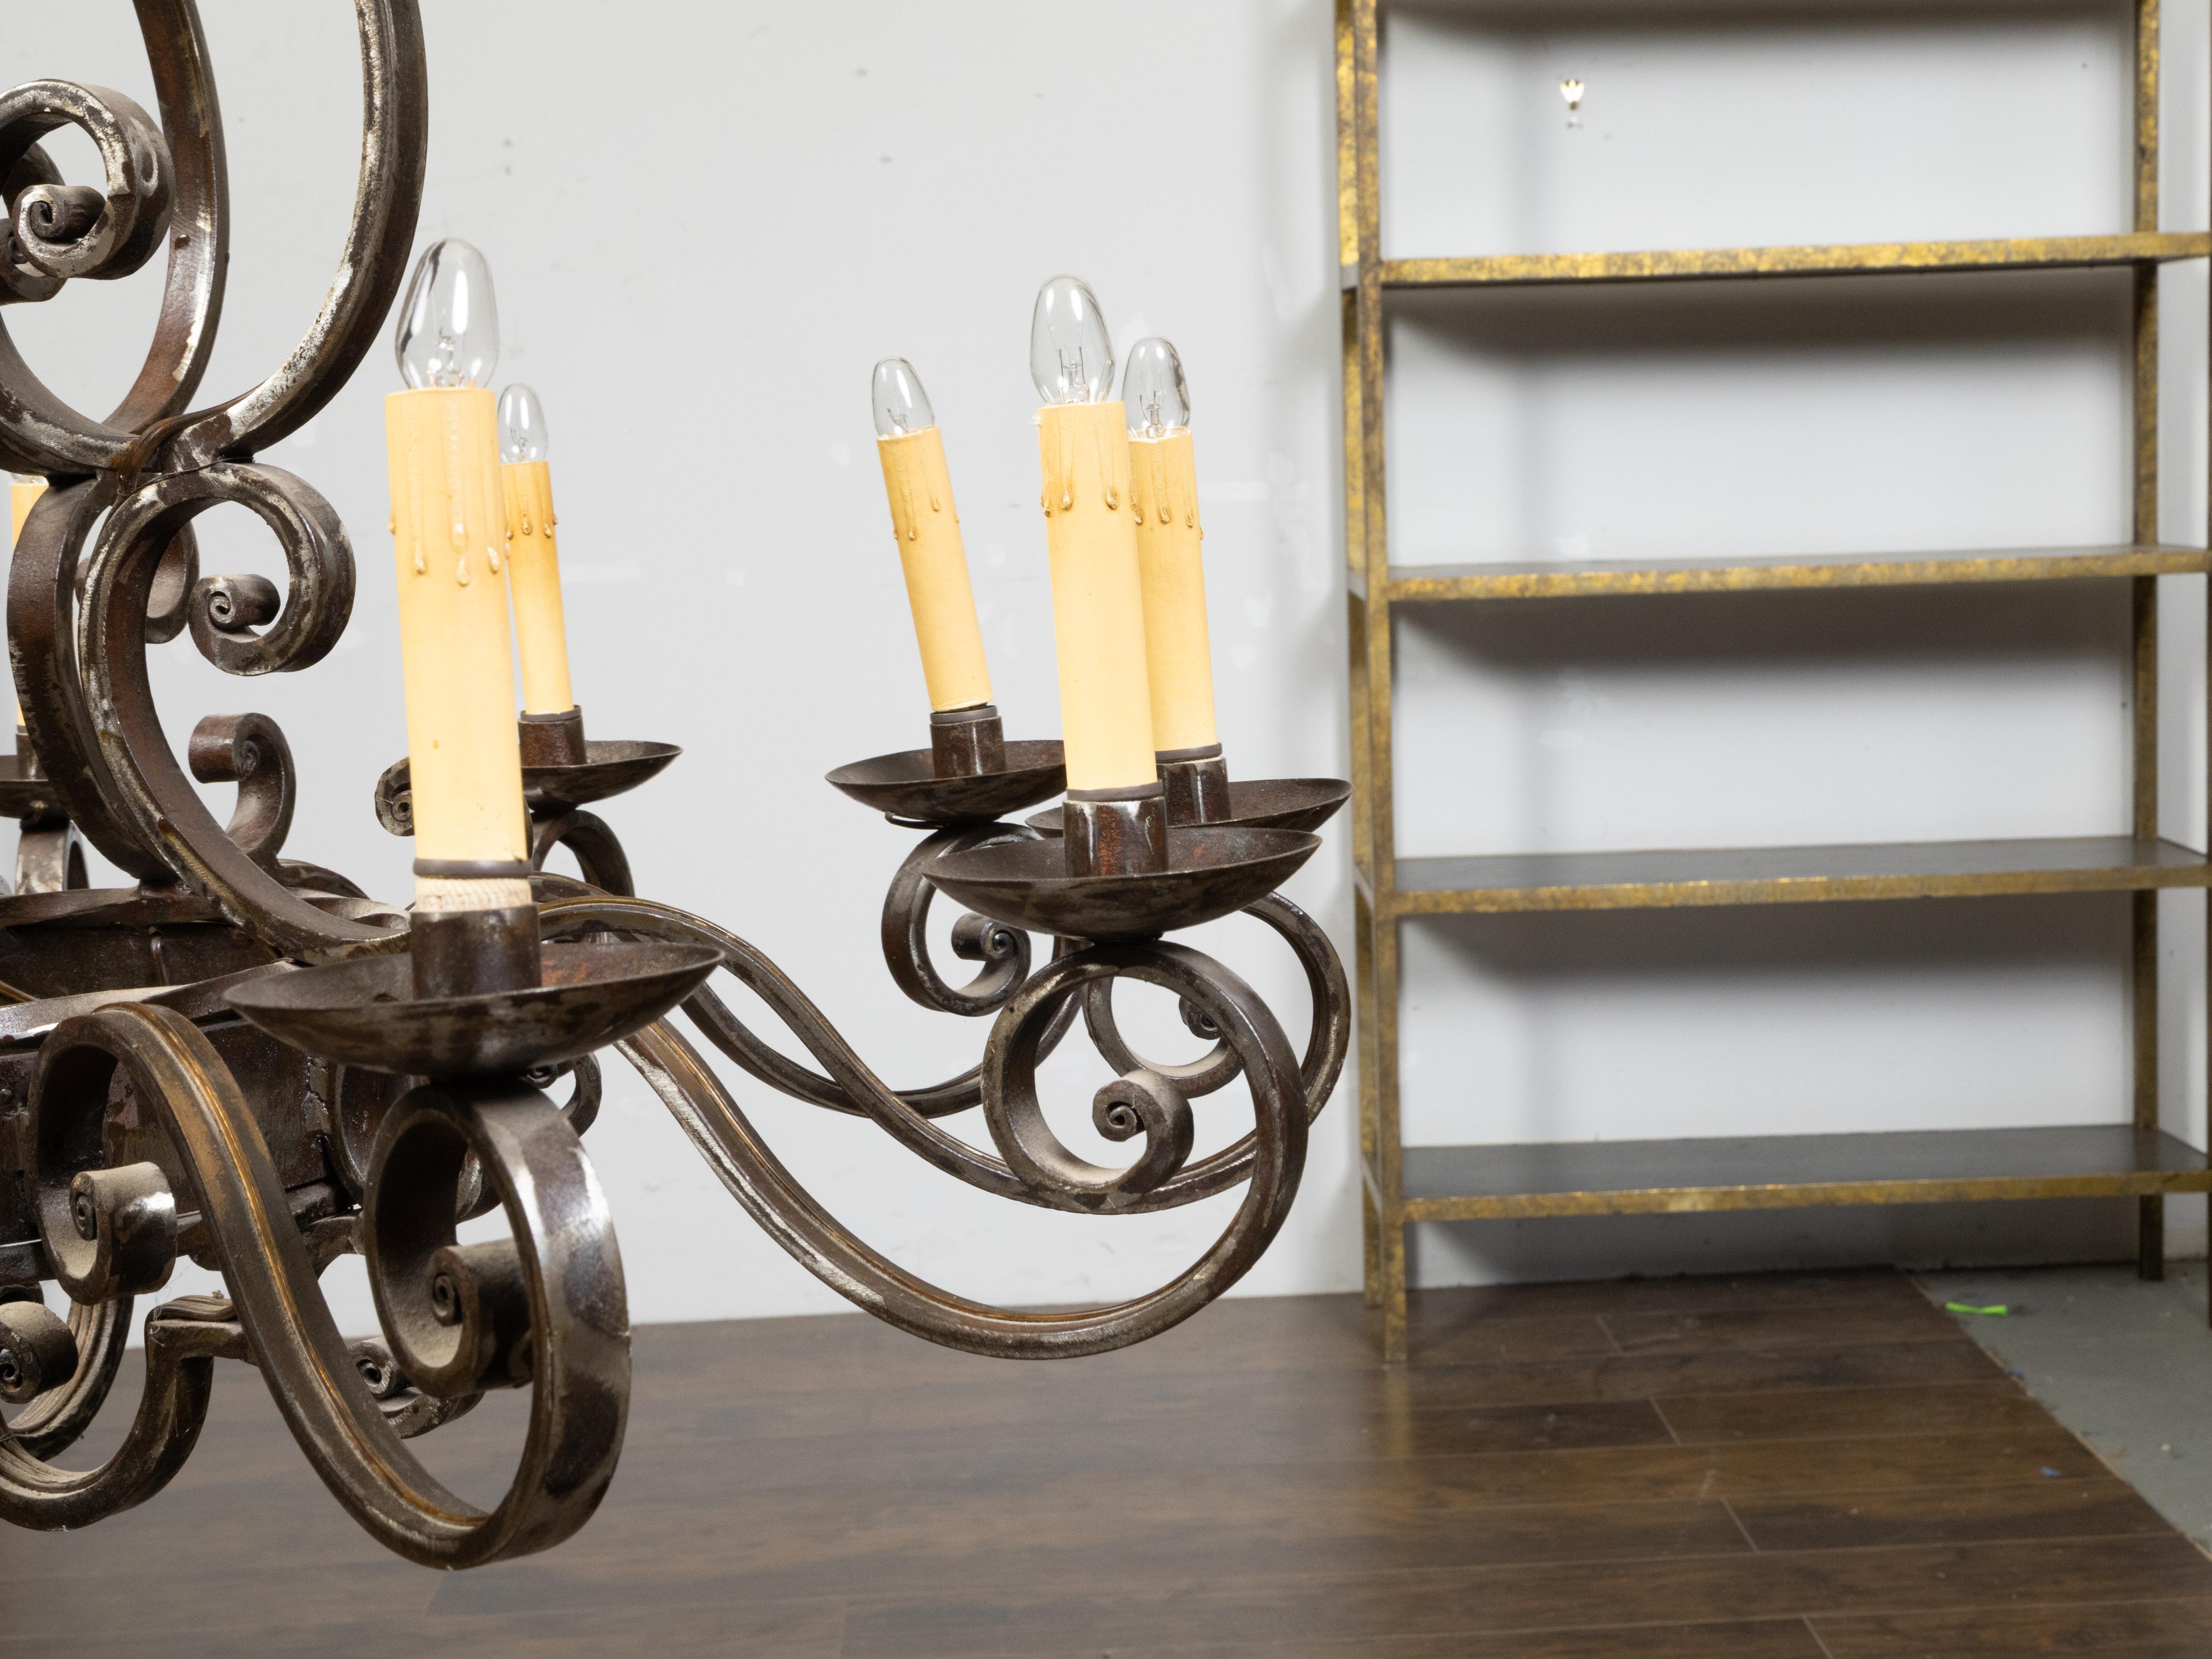 Midcentury French Steel 12-Light Chandelier with Scrolls and Dark Patina For Sale 4